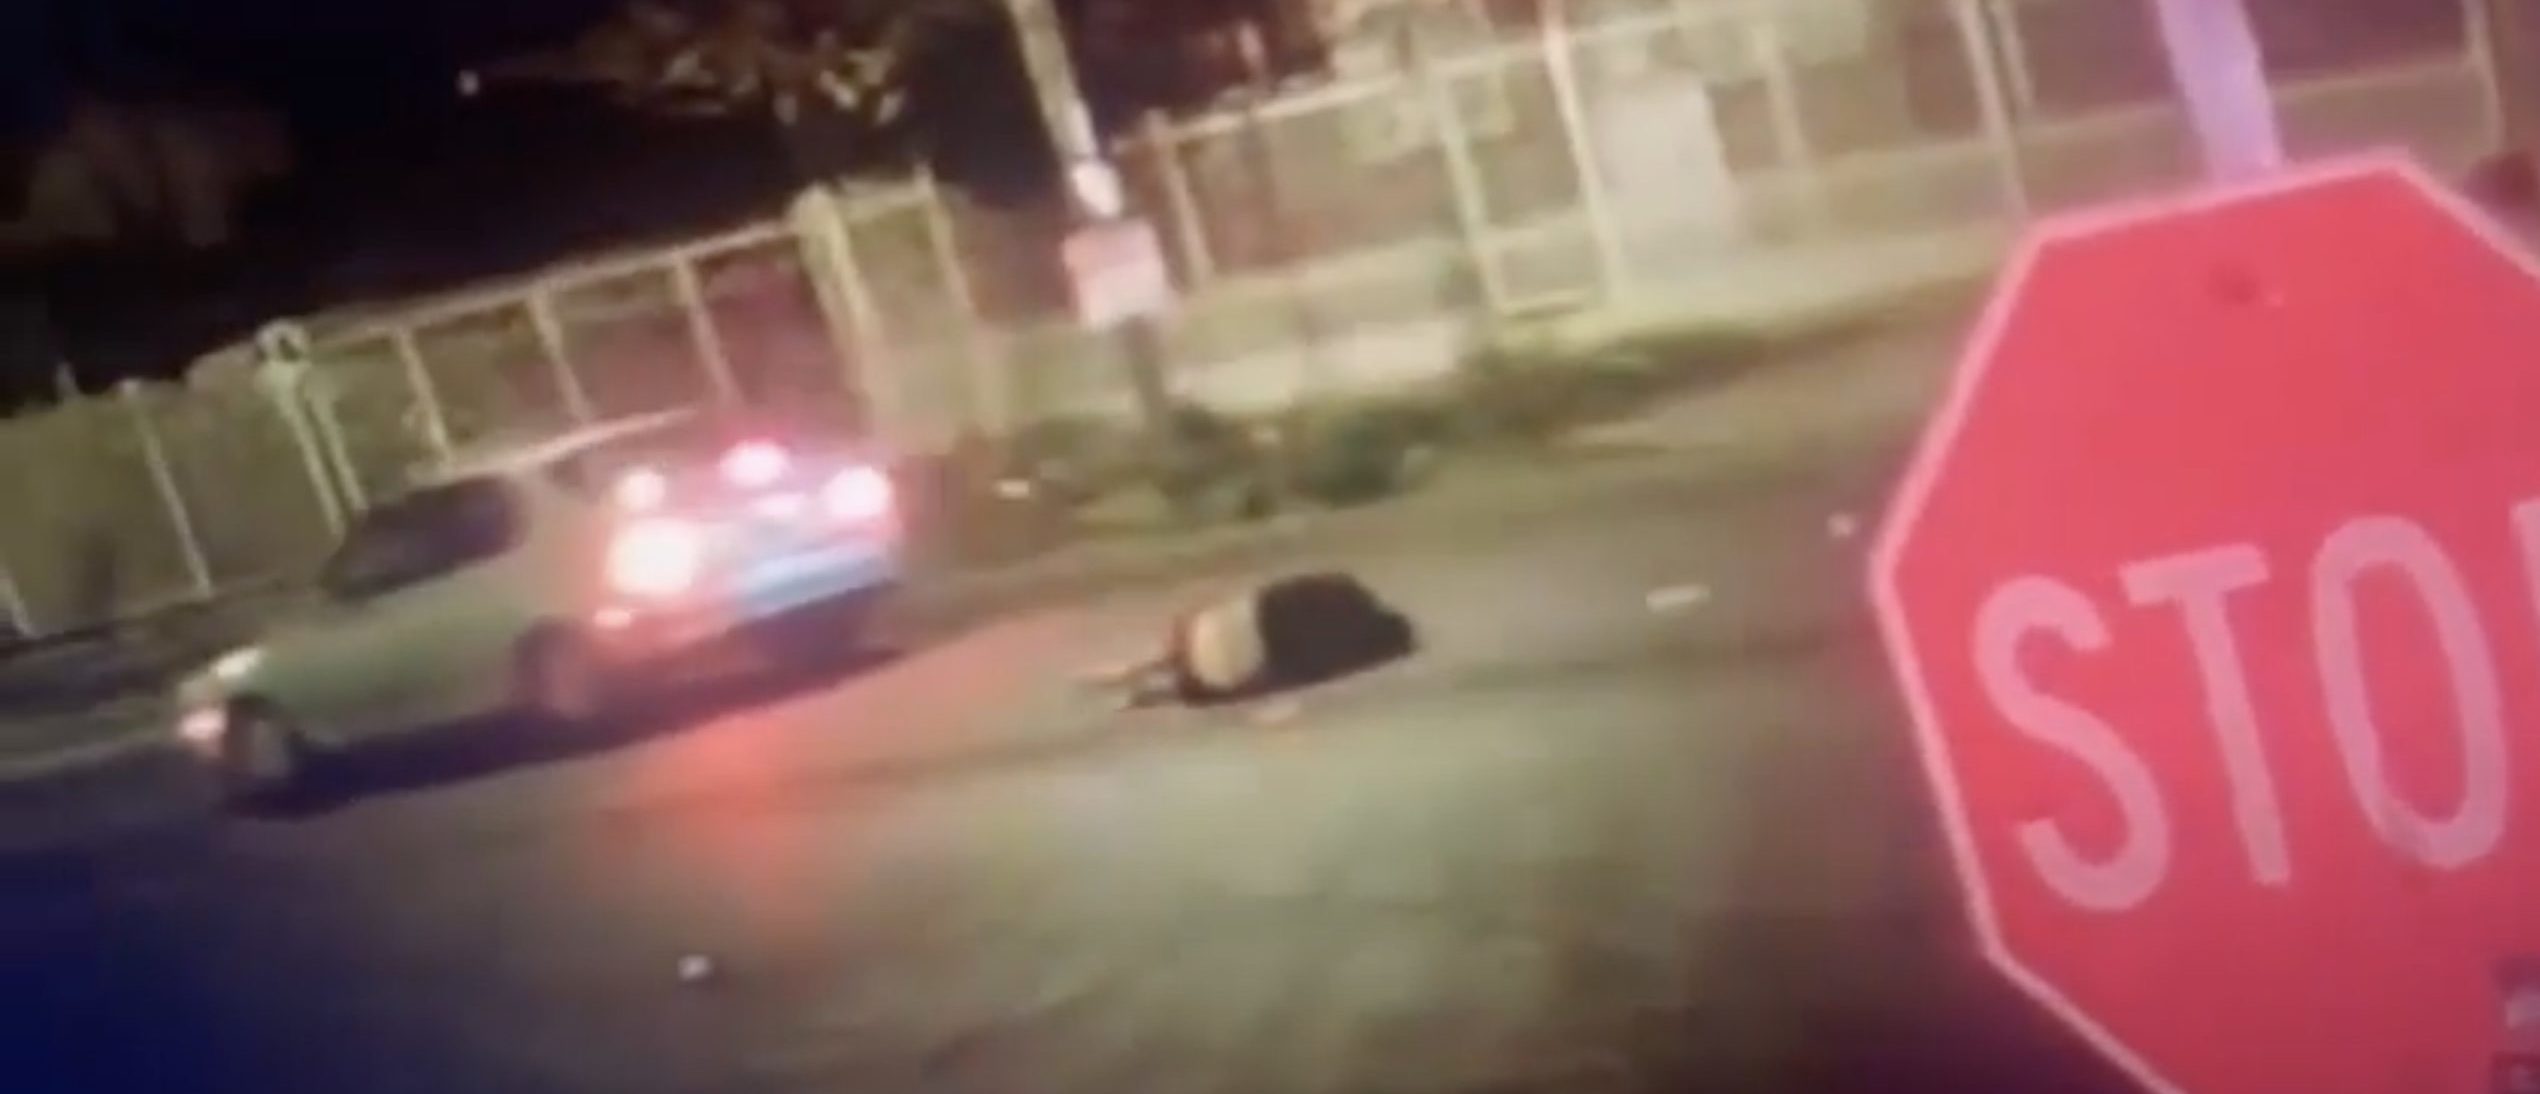 Man Hit By Car Gets Run Over And Dragged By Second Car In Fatal Hit And Run Video Shows The